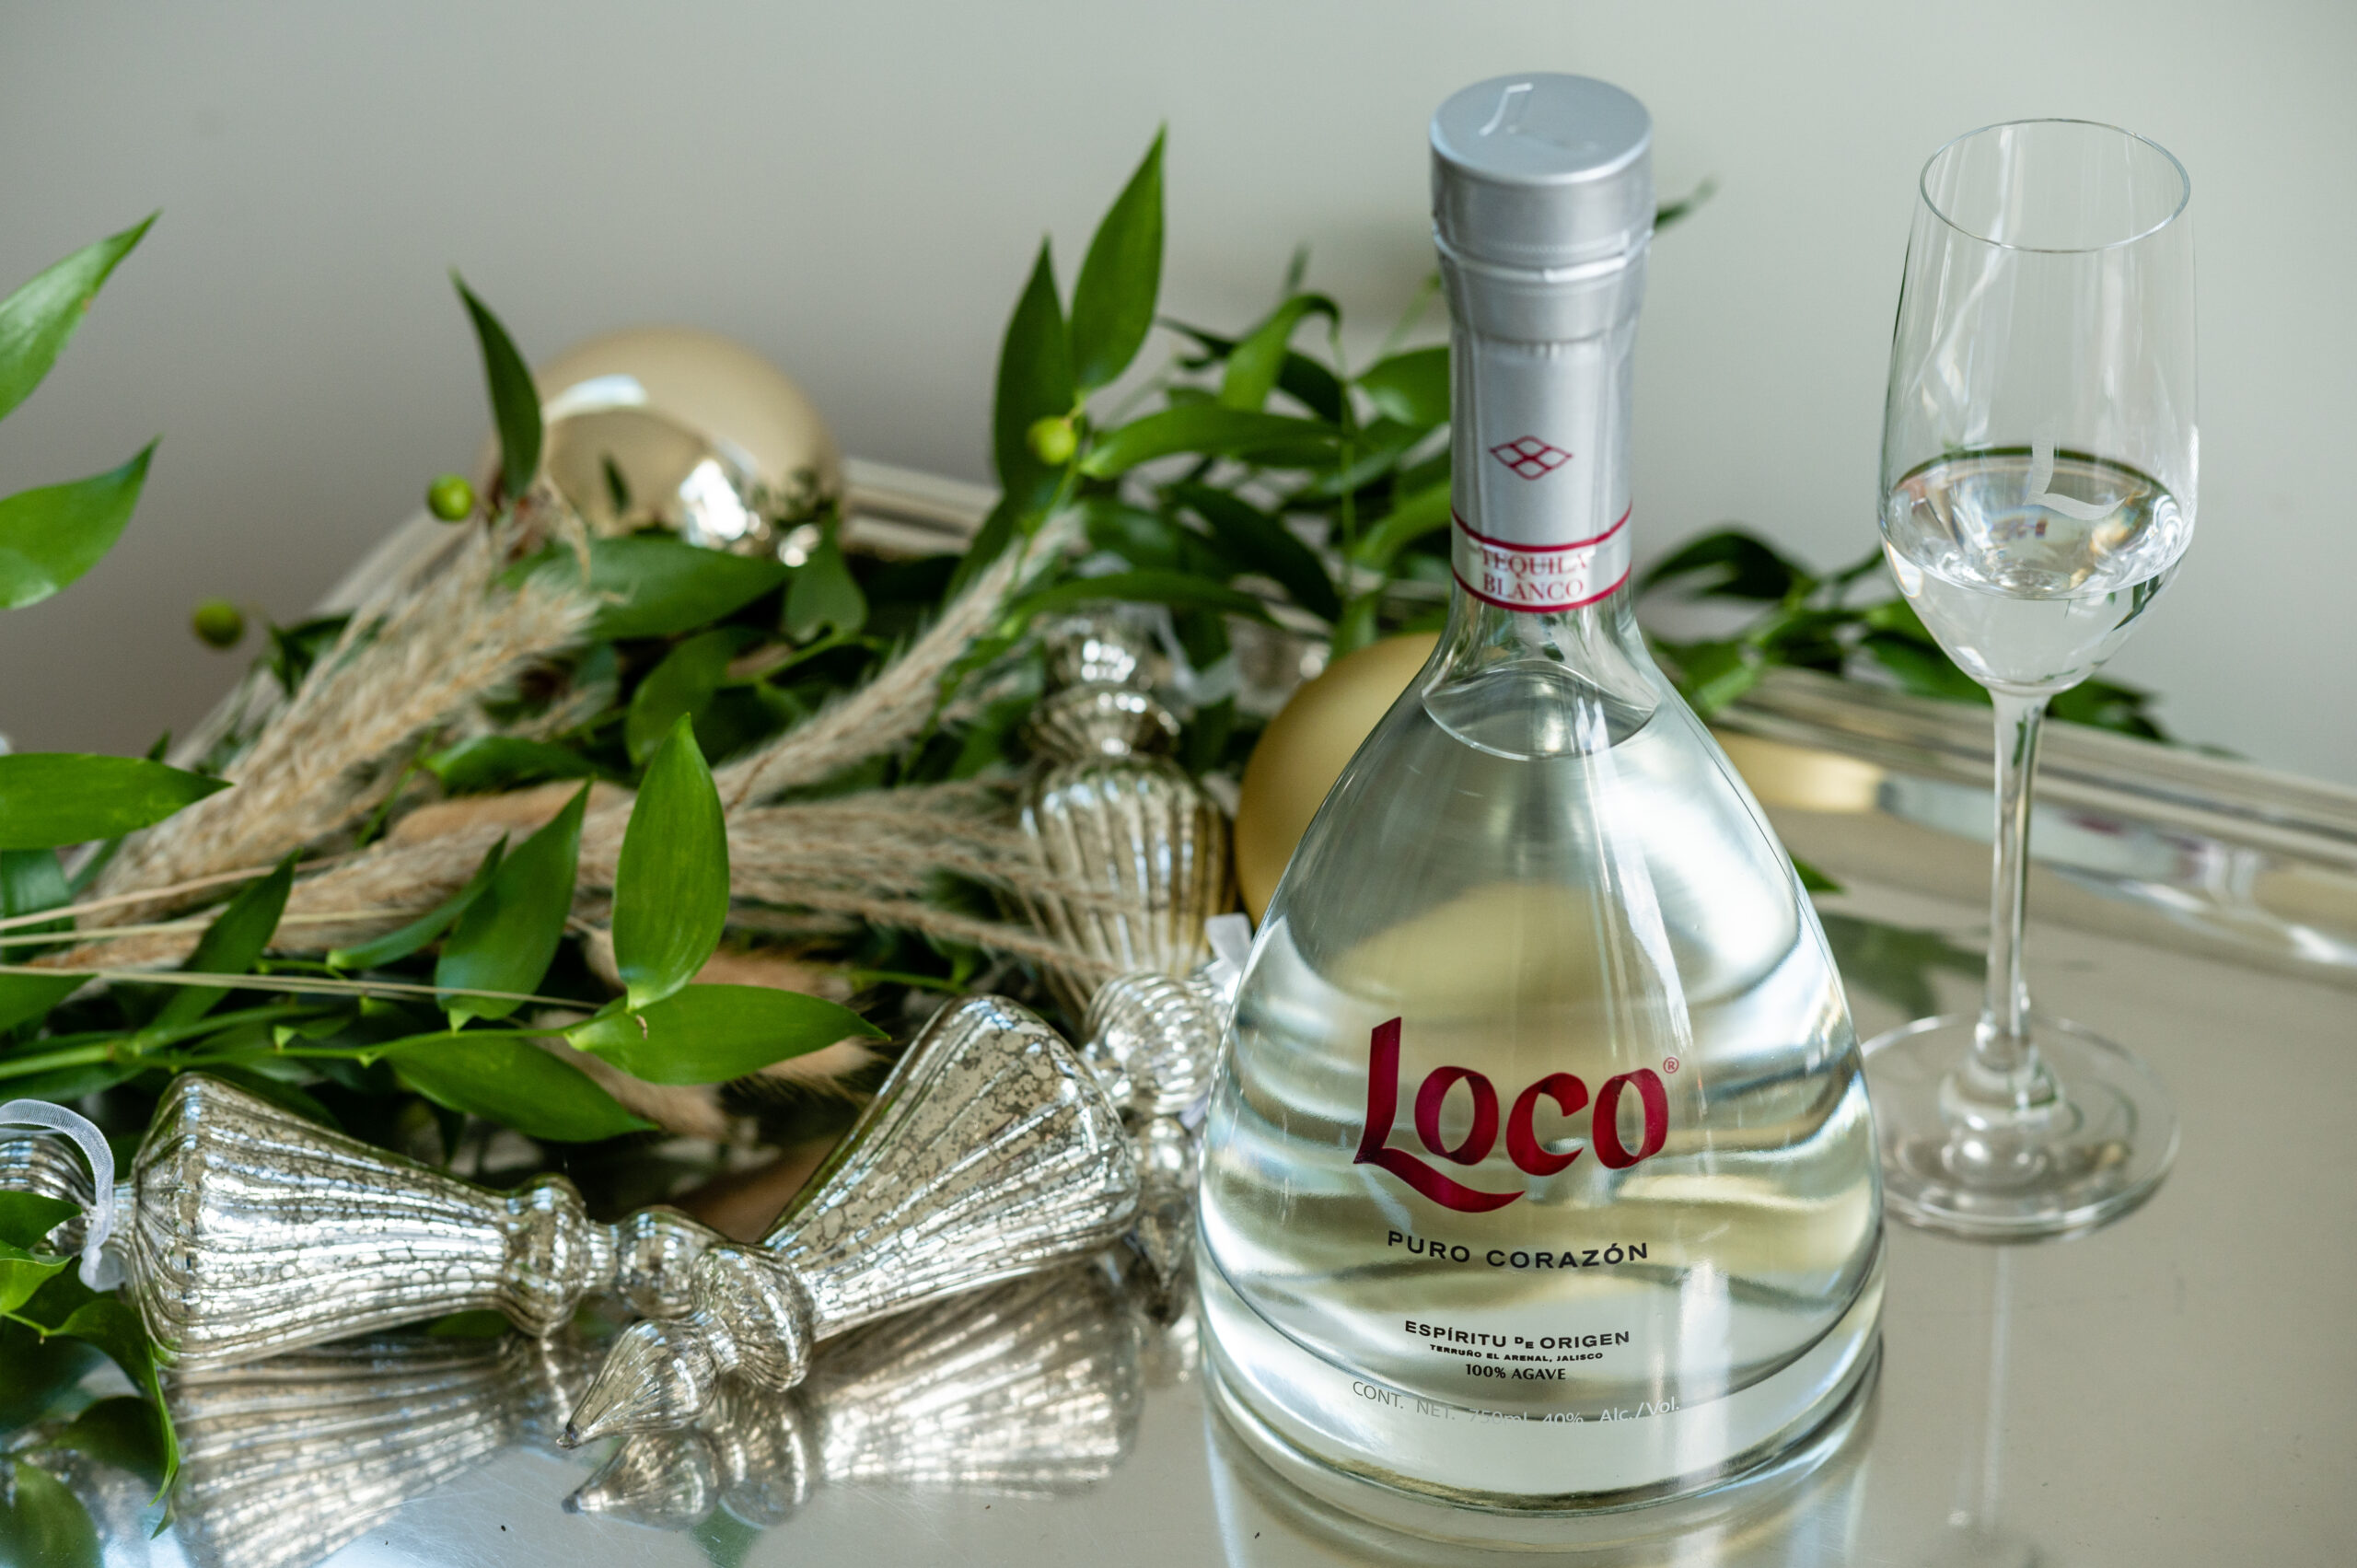 7 boozy gift ideas you'll want for yourself this Christmas - Spill